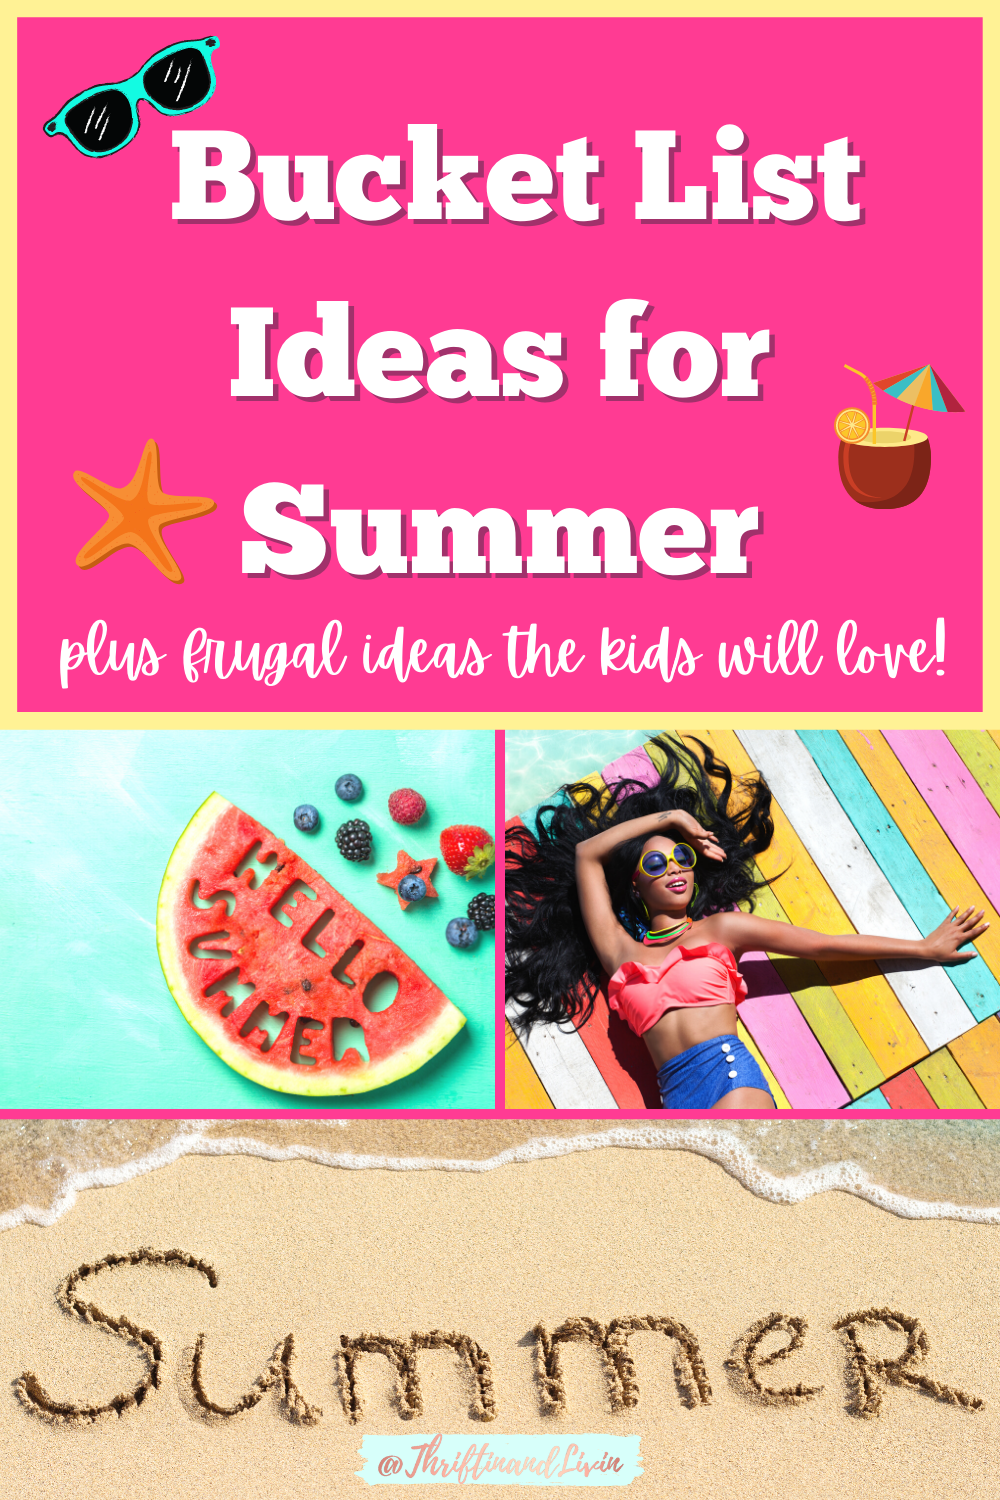 Bucket List Ideas for Summer - plus frugal ideas the kids will love! Pinterest Pin Image